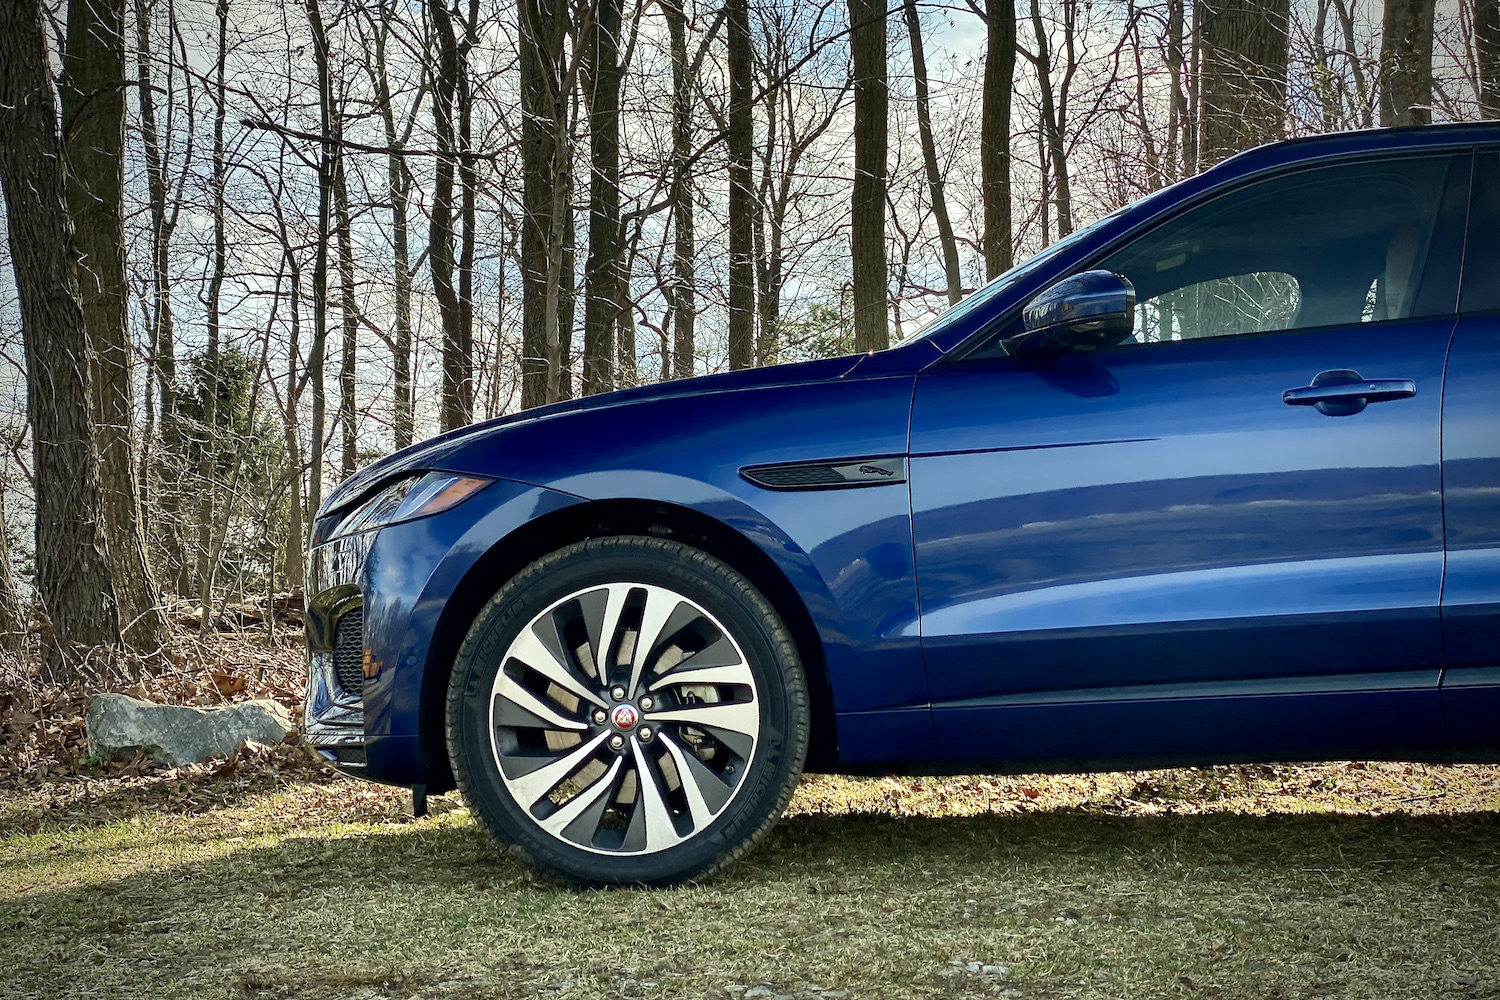 Close up of 2022 Jaguar F-Pace R Dynamic S front end in a grassy field with trees in the background.